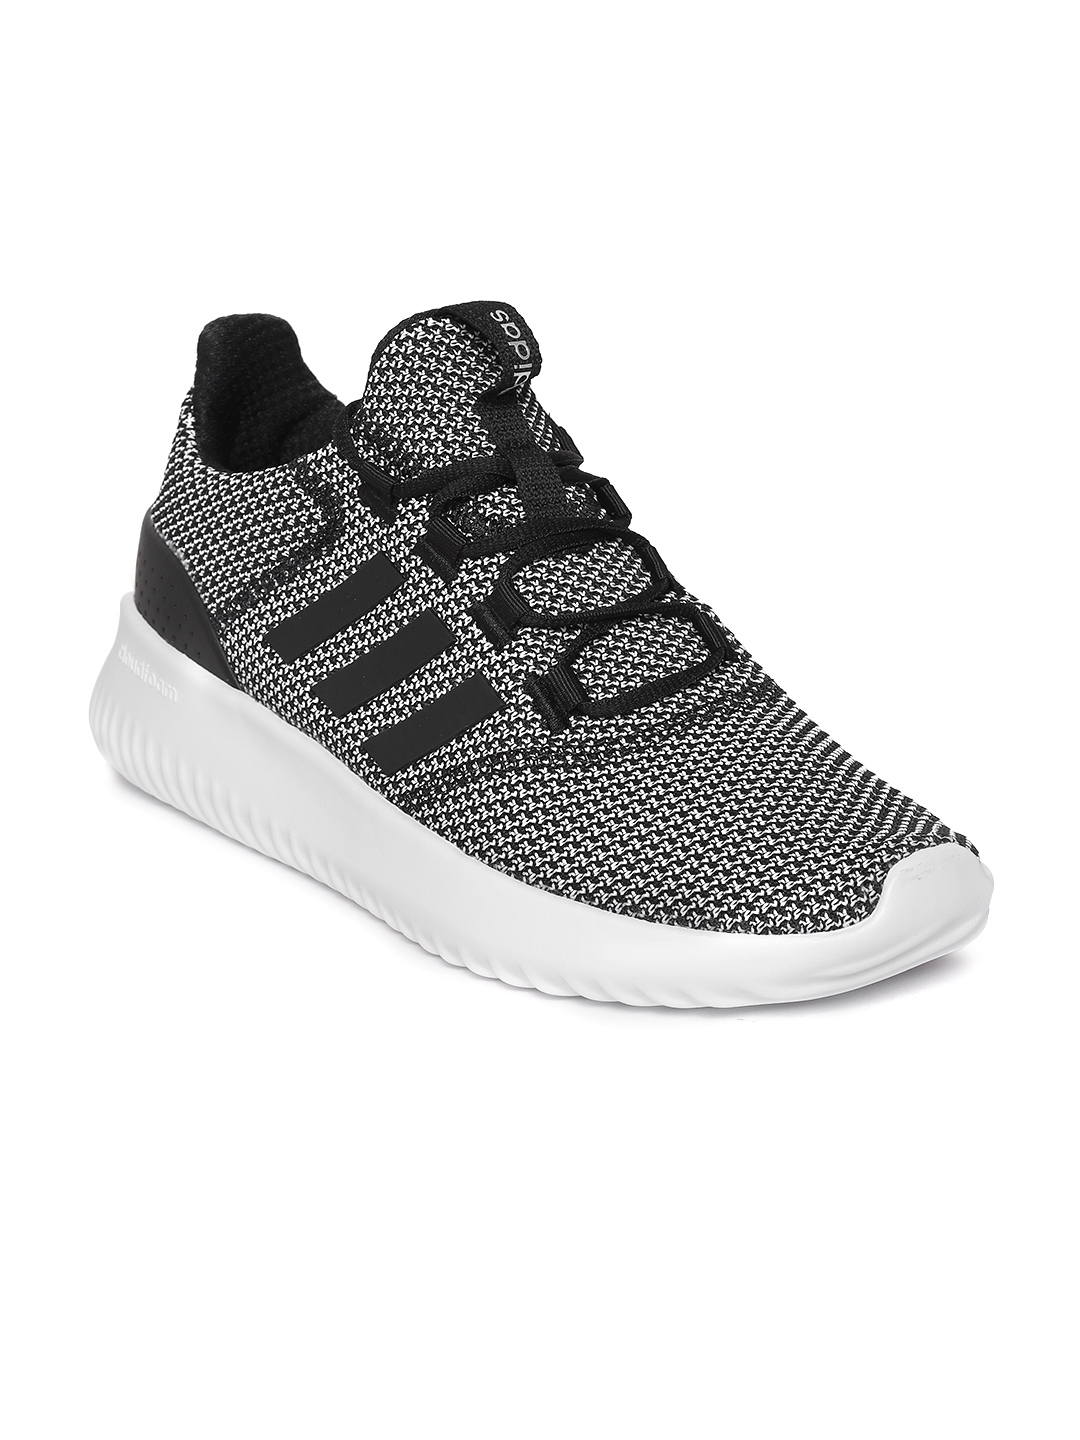 adidas foam shoes great selection & quick delivery